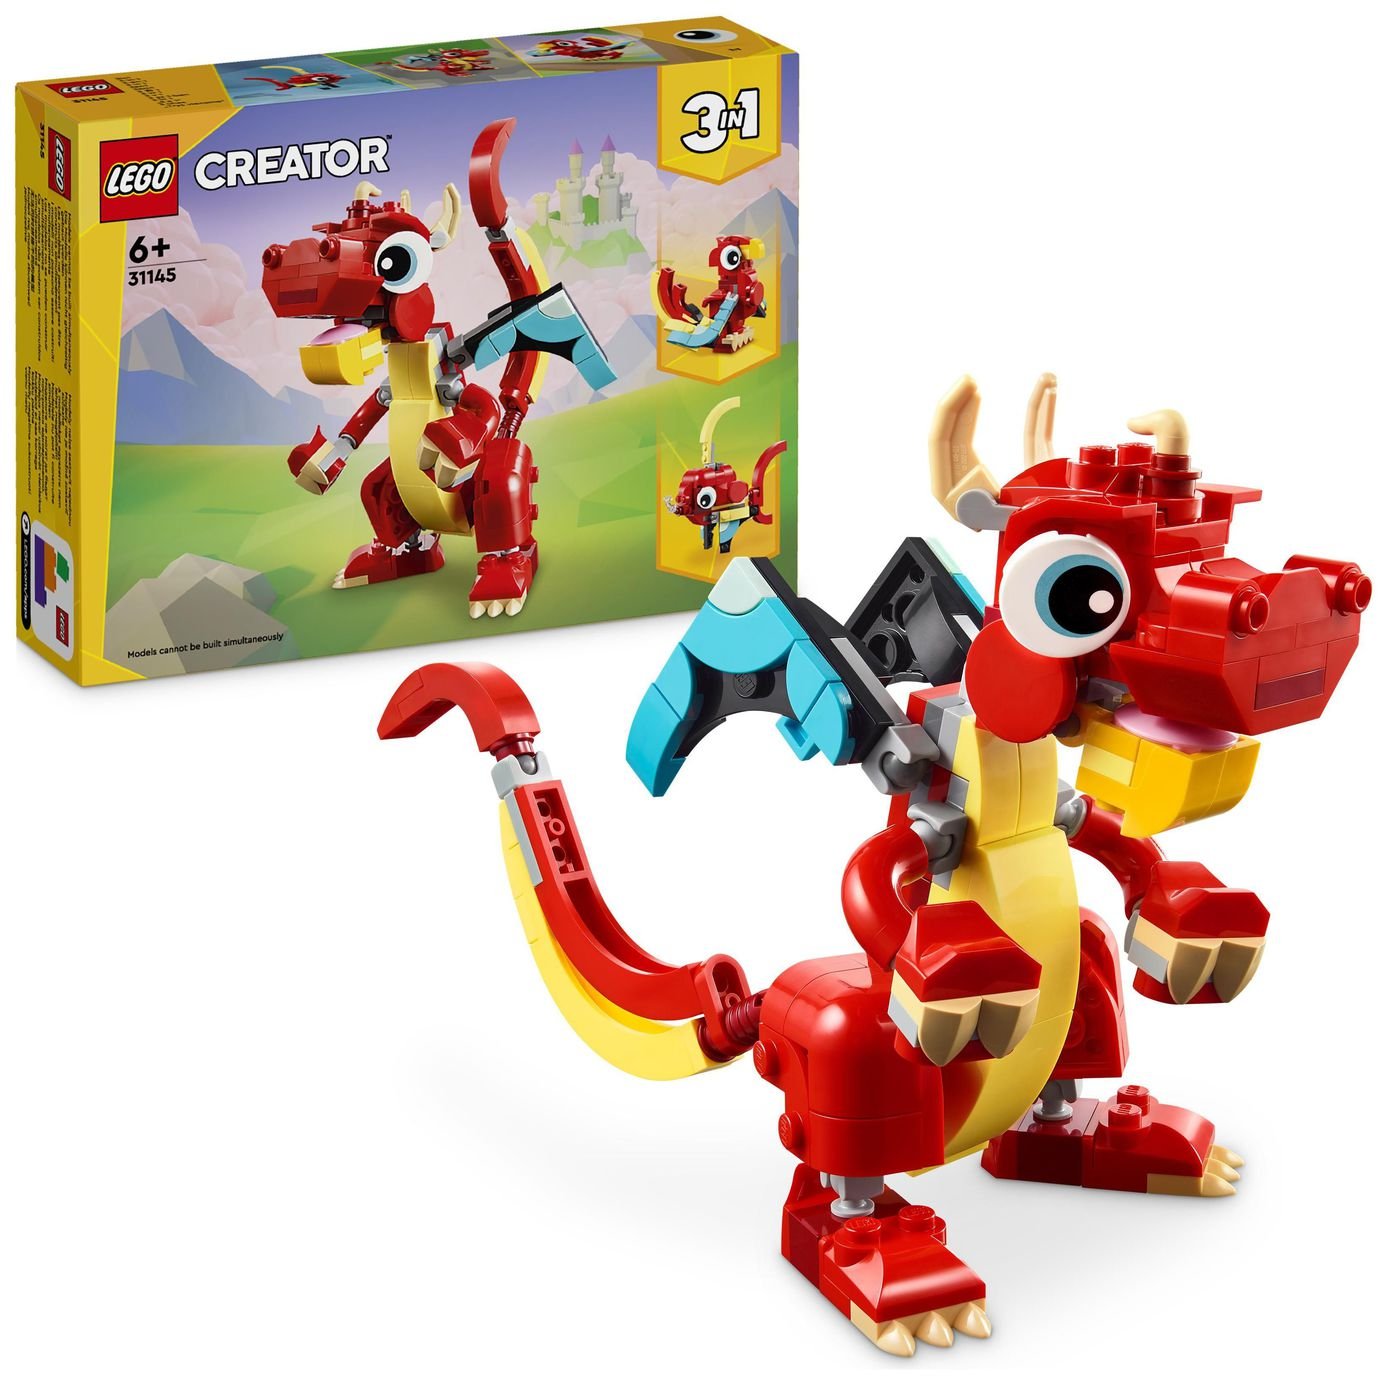 LEGO Creator 3in1 Red Dragon Toy with Animal Figures 31145